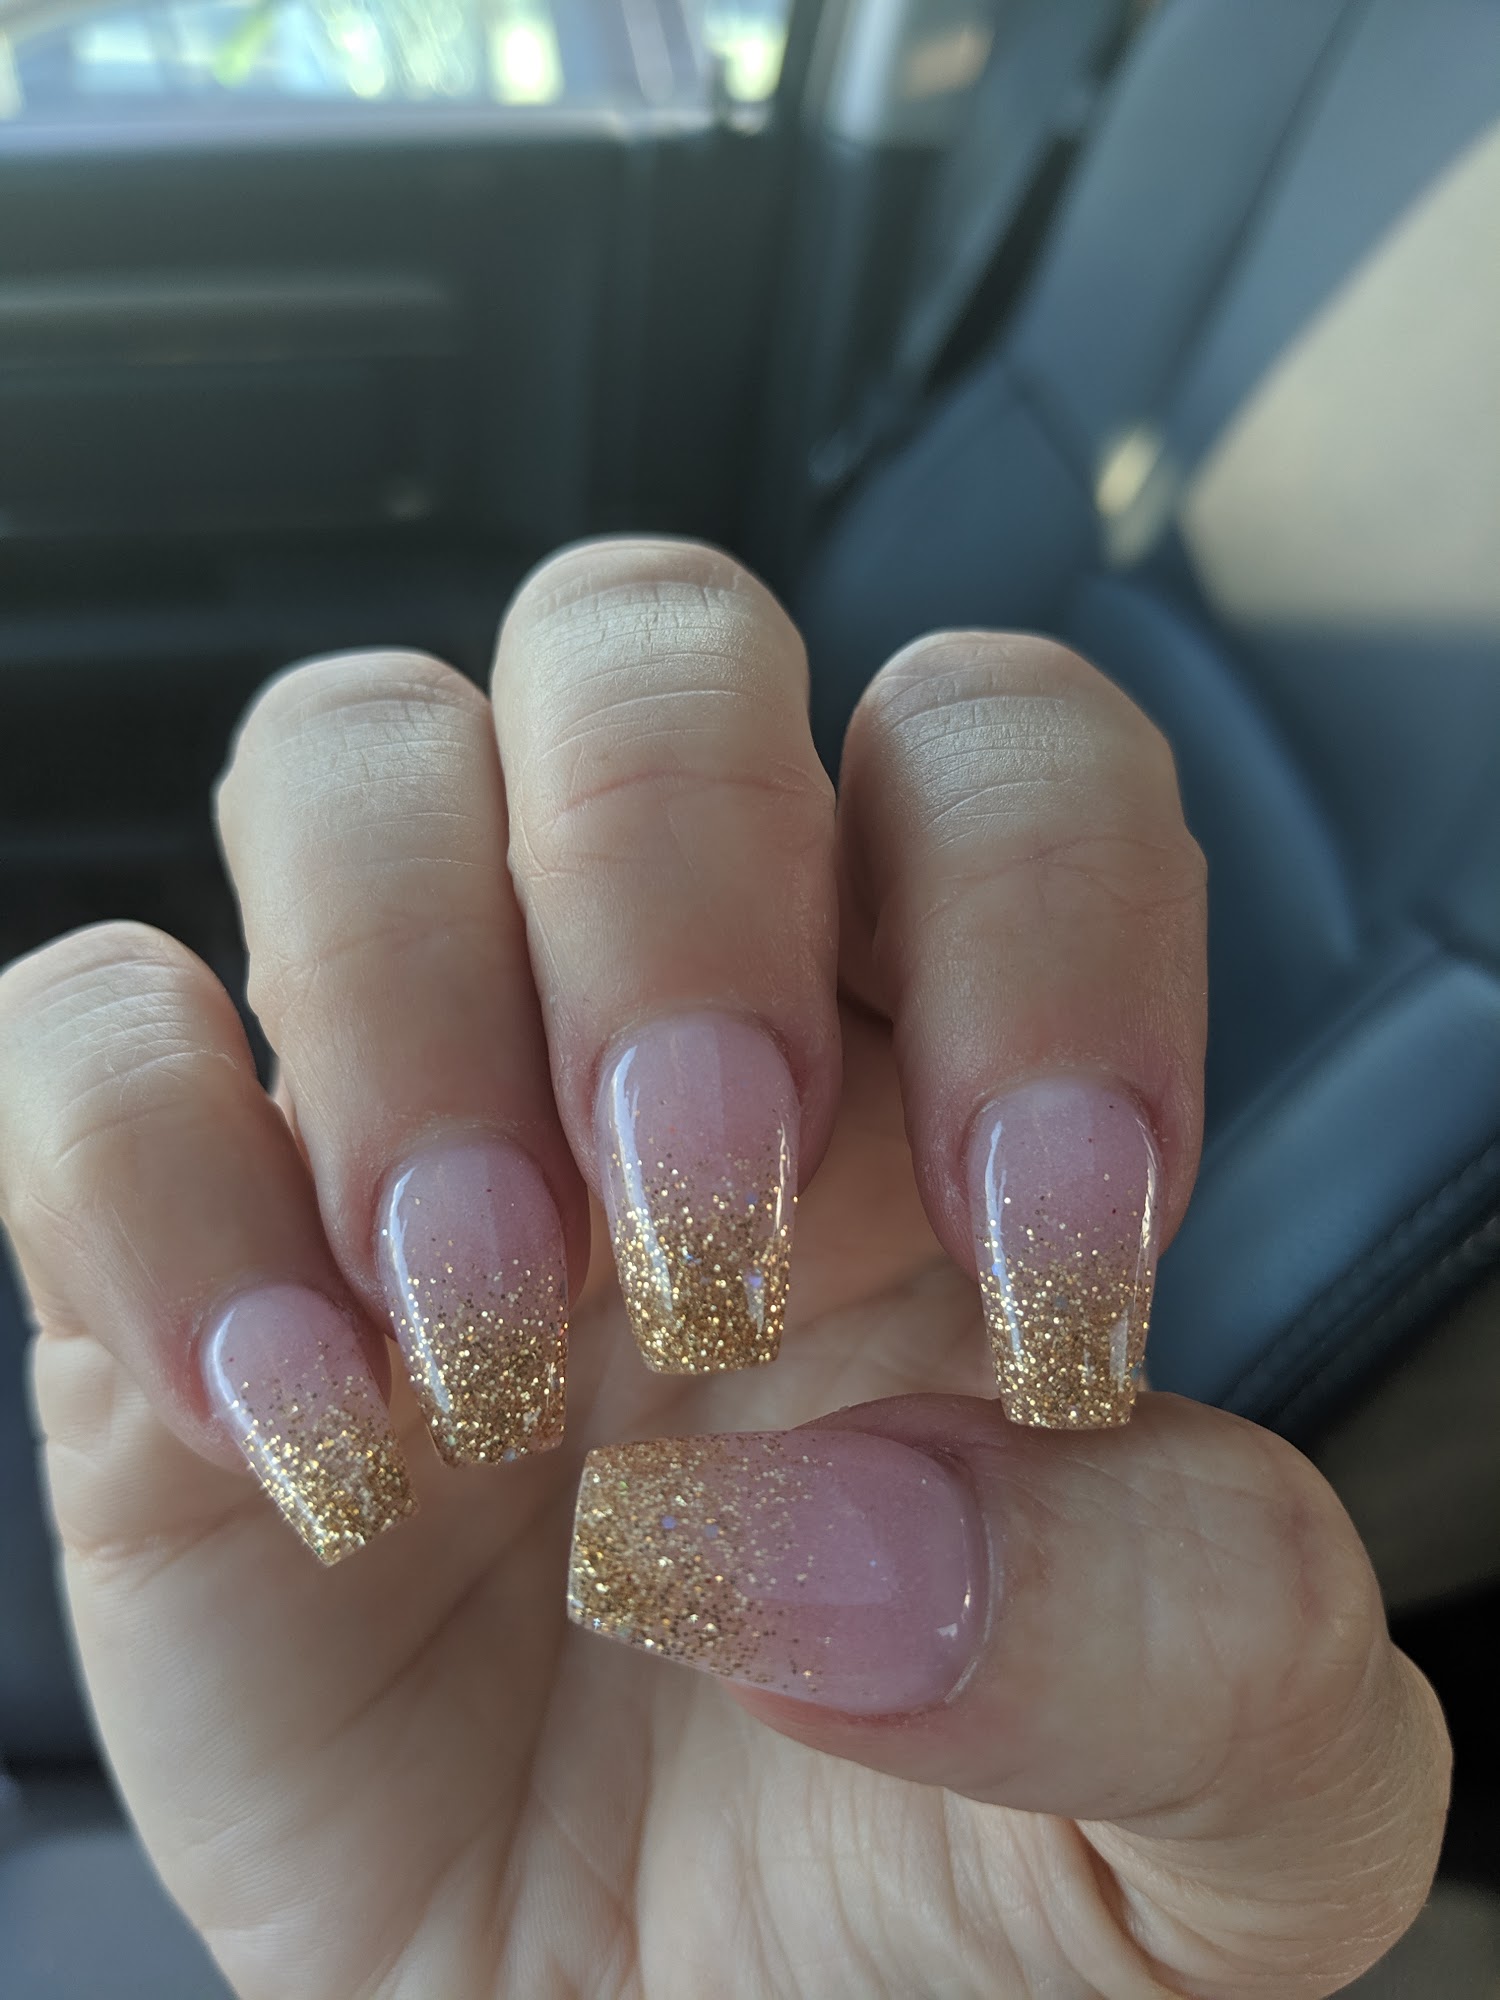 Kylie's Nails & Spa